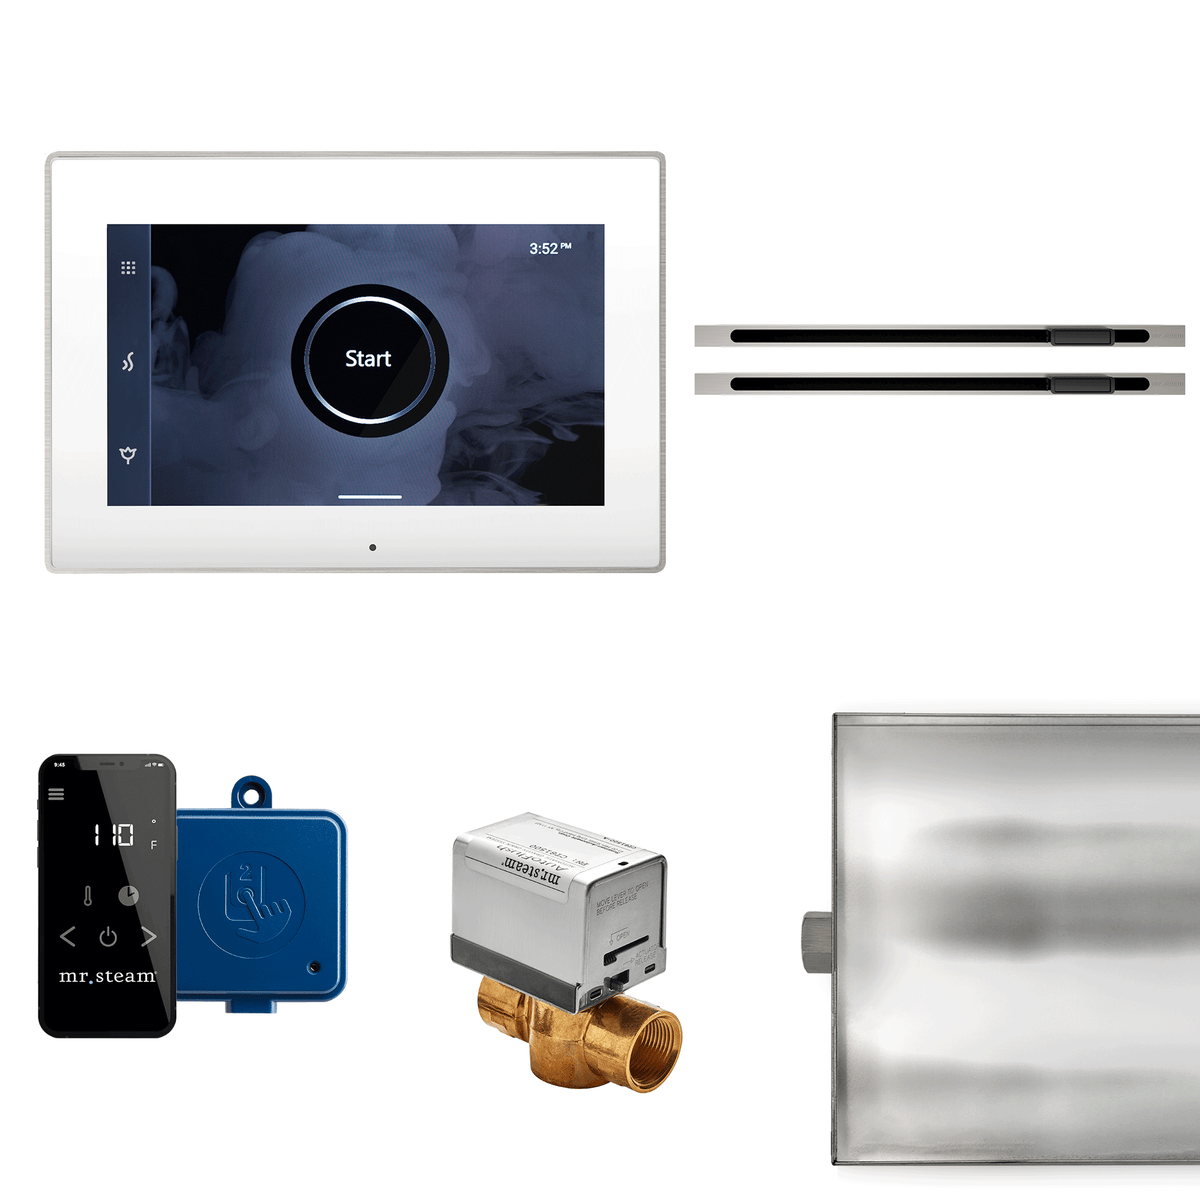 XBTLRWHXLBN_Mr. Steam_XButler Max Linear Steam Shower Control Package with iSteamX Control and Linear SteamHead